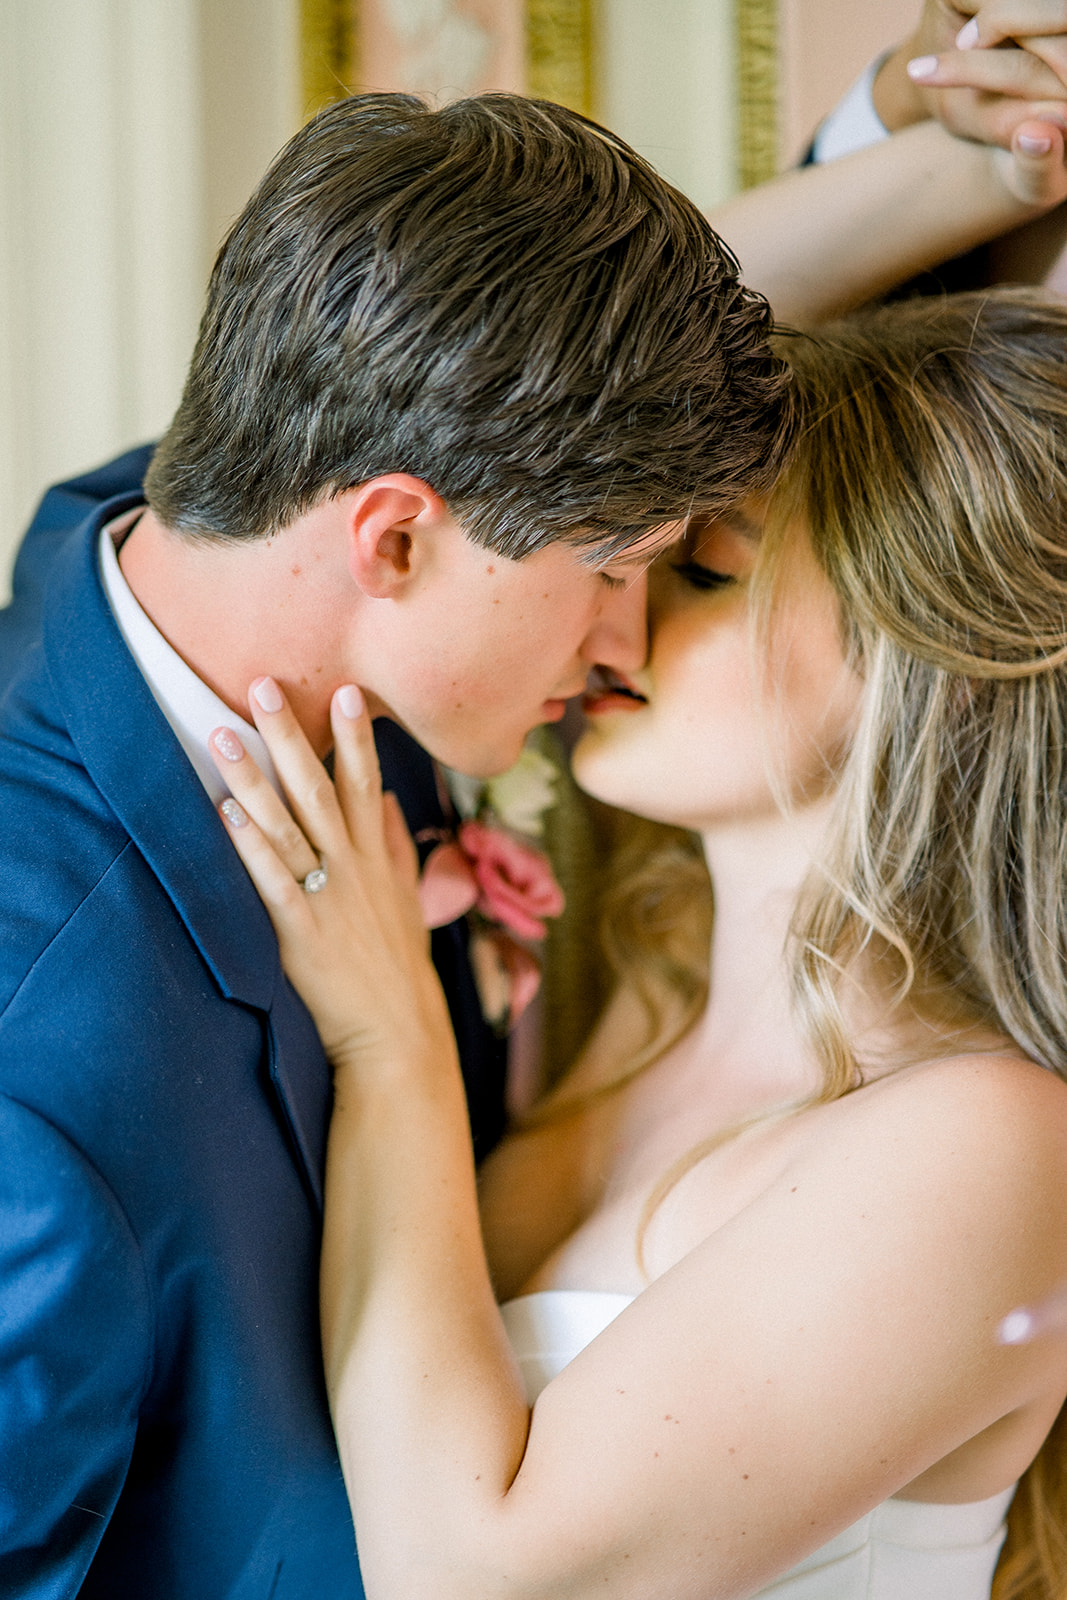 Beautiful couple in a candid moment, encapsulating the essence of a luxury destination wedding at Cairnwood Estate.